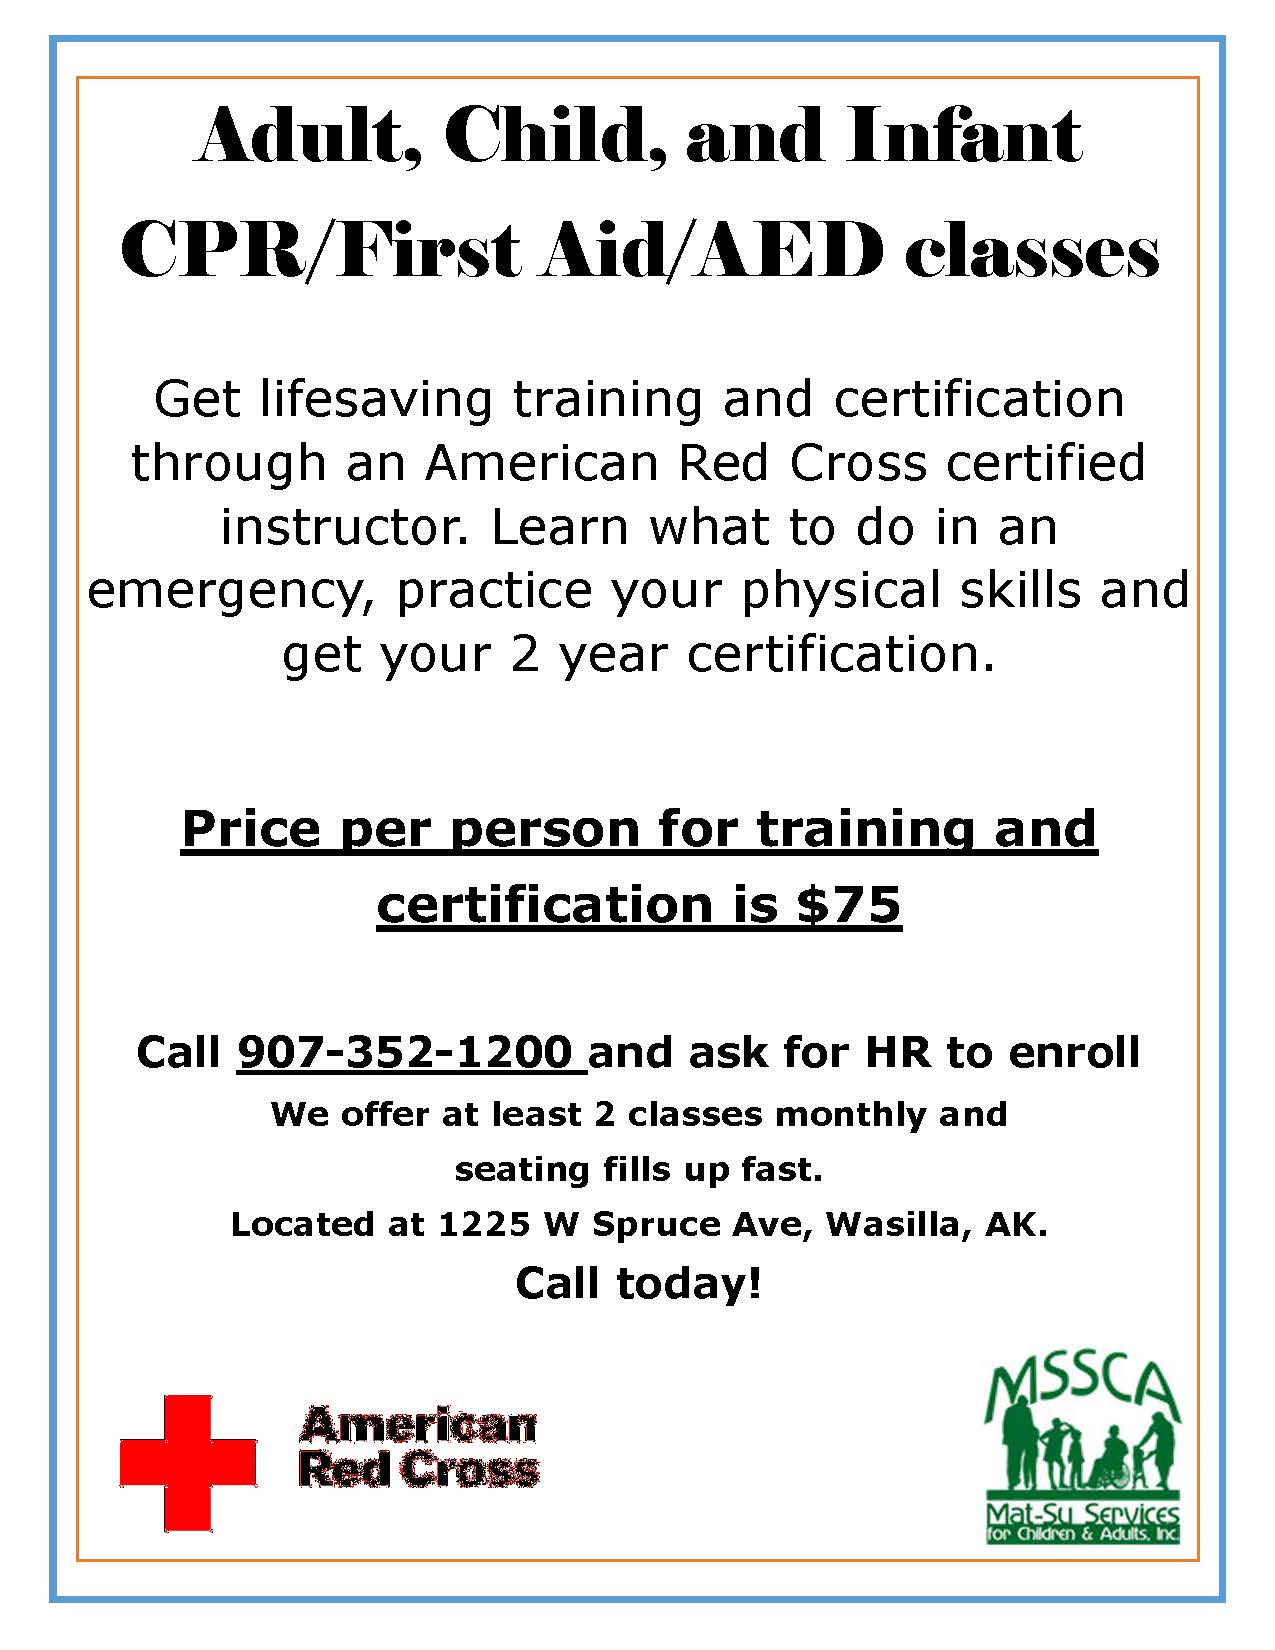 Red Cross Adult, Child, & Infant CPR/AED/First Aid classes